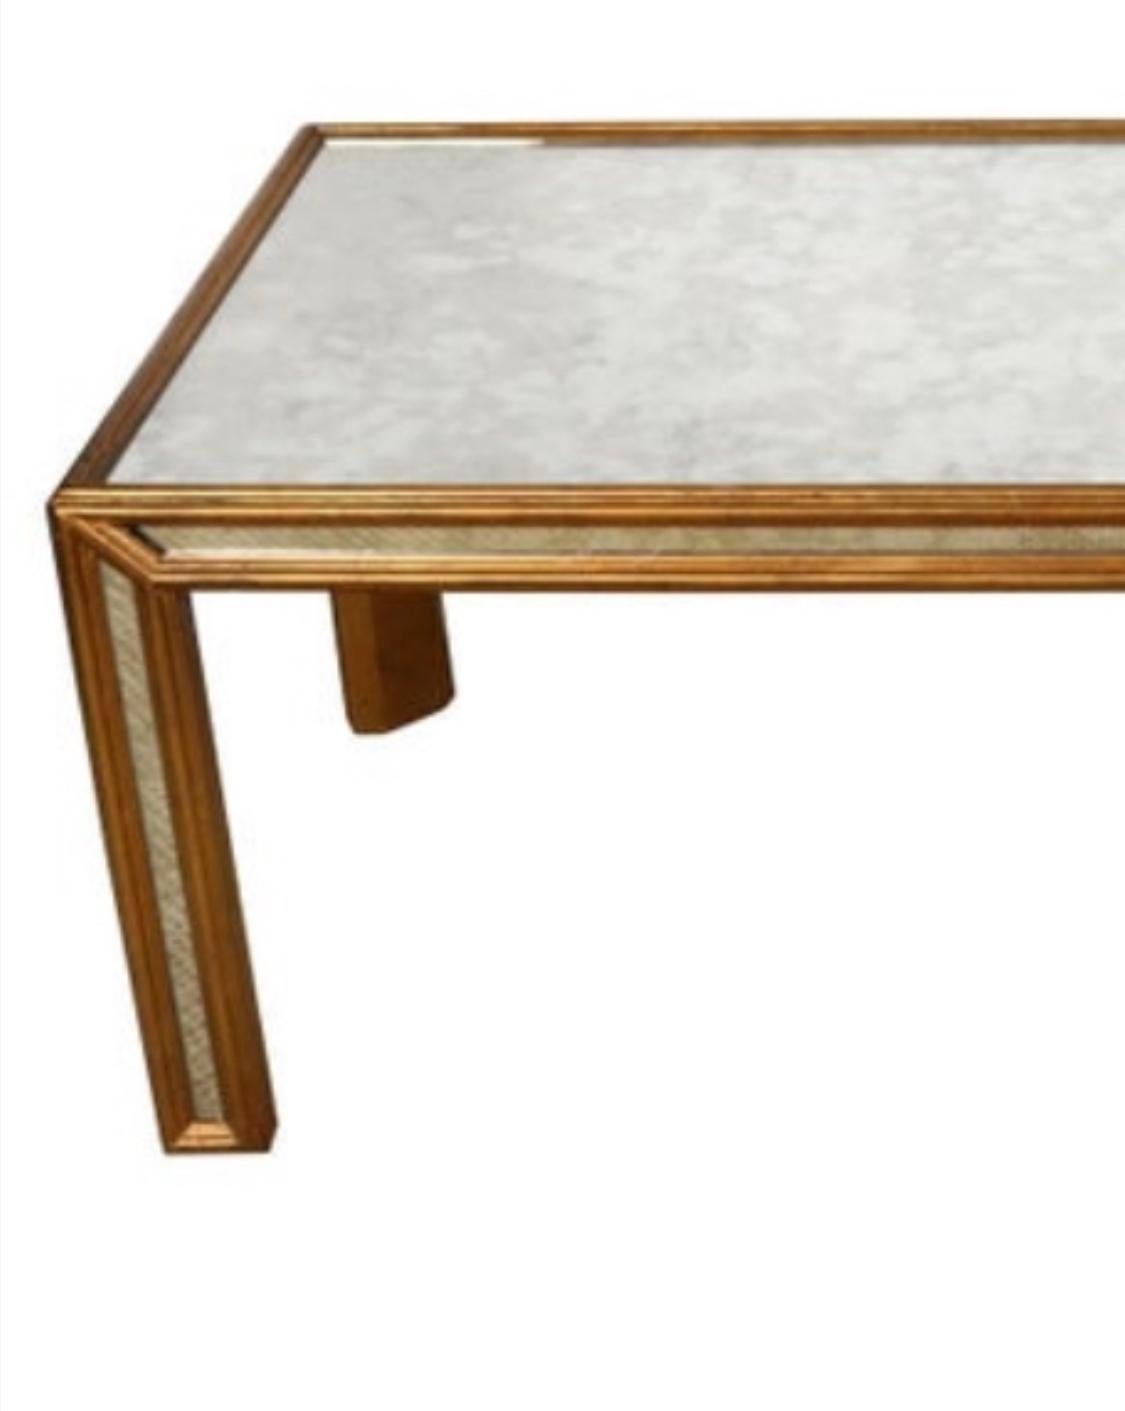 Elegant Gilt and Mirrored Glass Coffee Table by Bernhardt In Good Condition For Sale In Brooklyn, NY